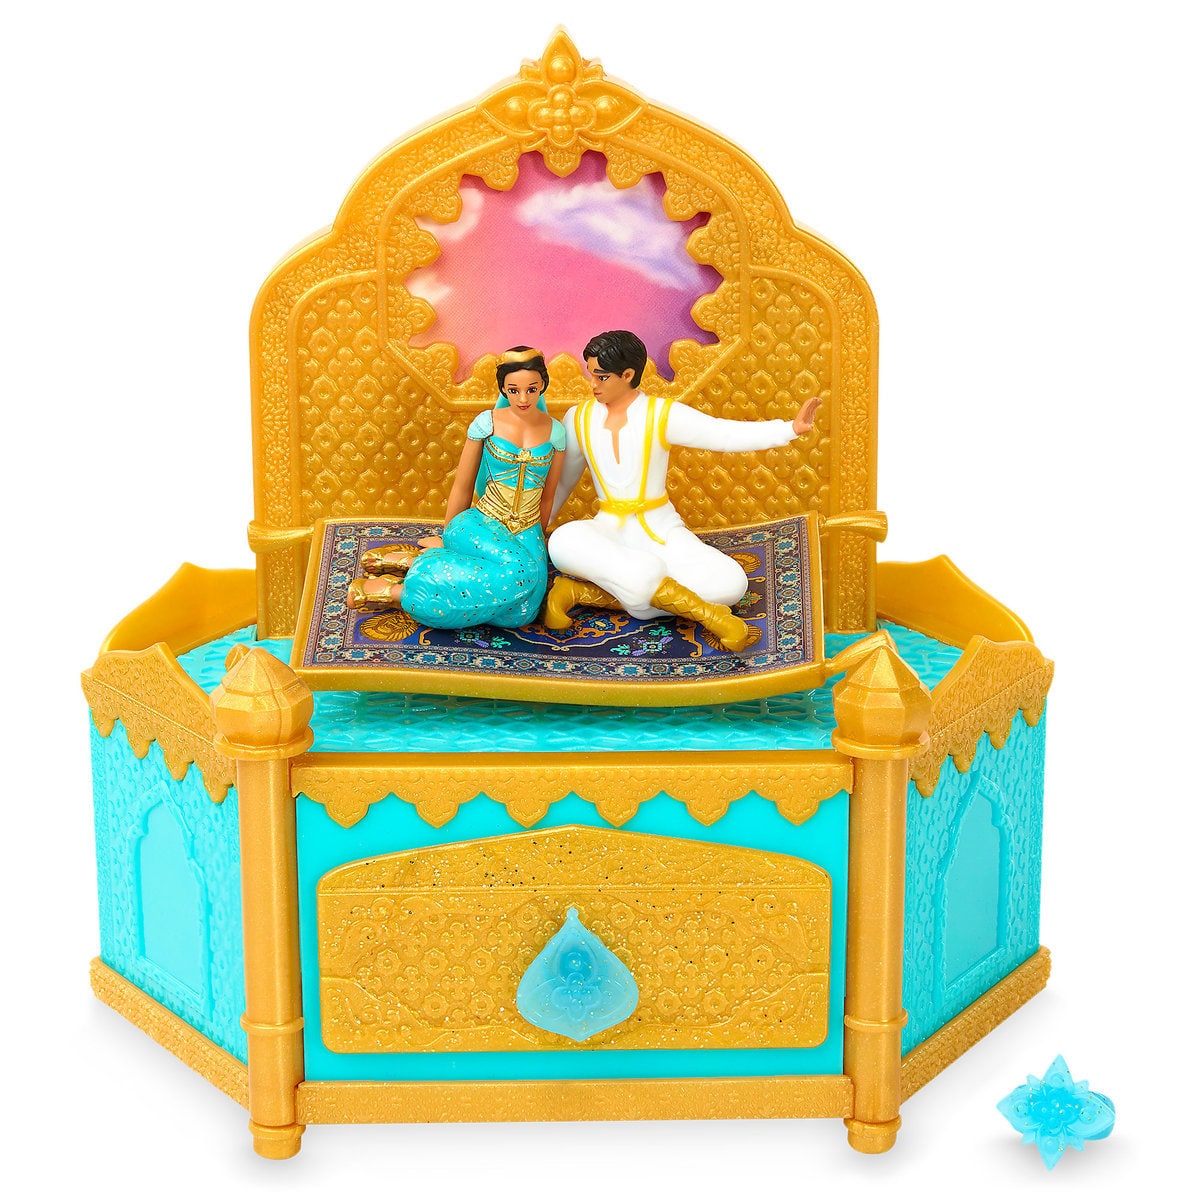 I can show you the world with this Aladdin jewelry box for kids | Top 25 Disney Gift Ideas for Toddlers featured by top US Disney blogger, Marcie and the Mouse